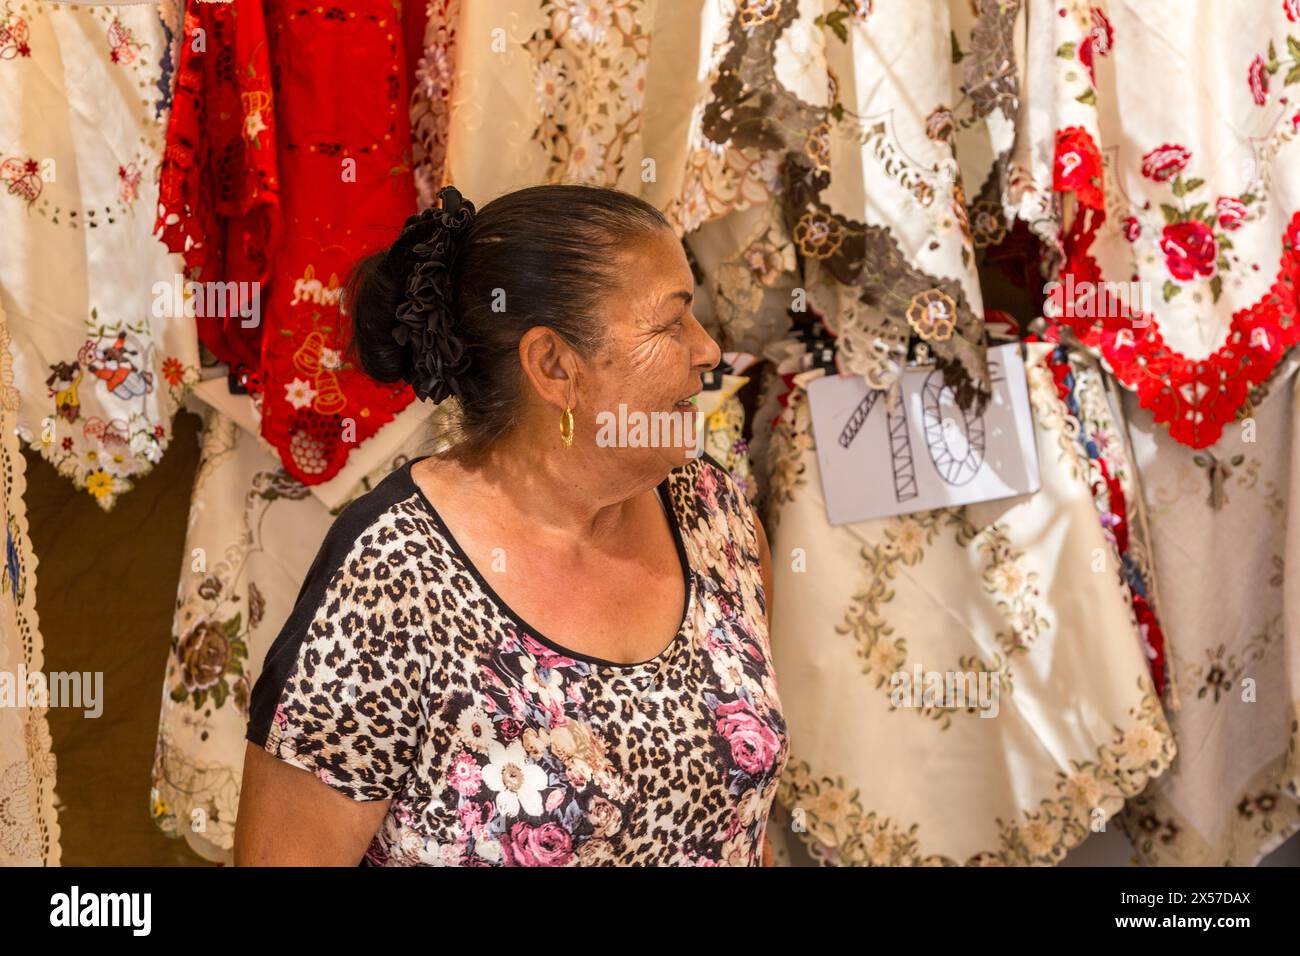 Woman selling embroidered lace at sunday market, Teguise, Lanzarote, Canary Islands, Spain Stock Photo